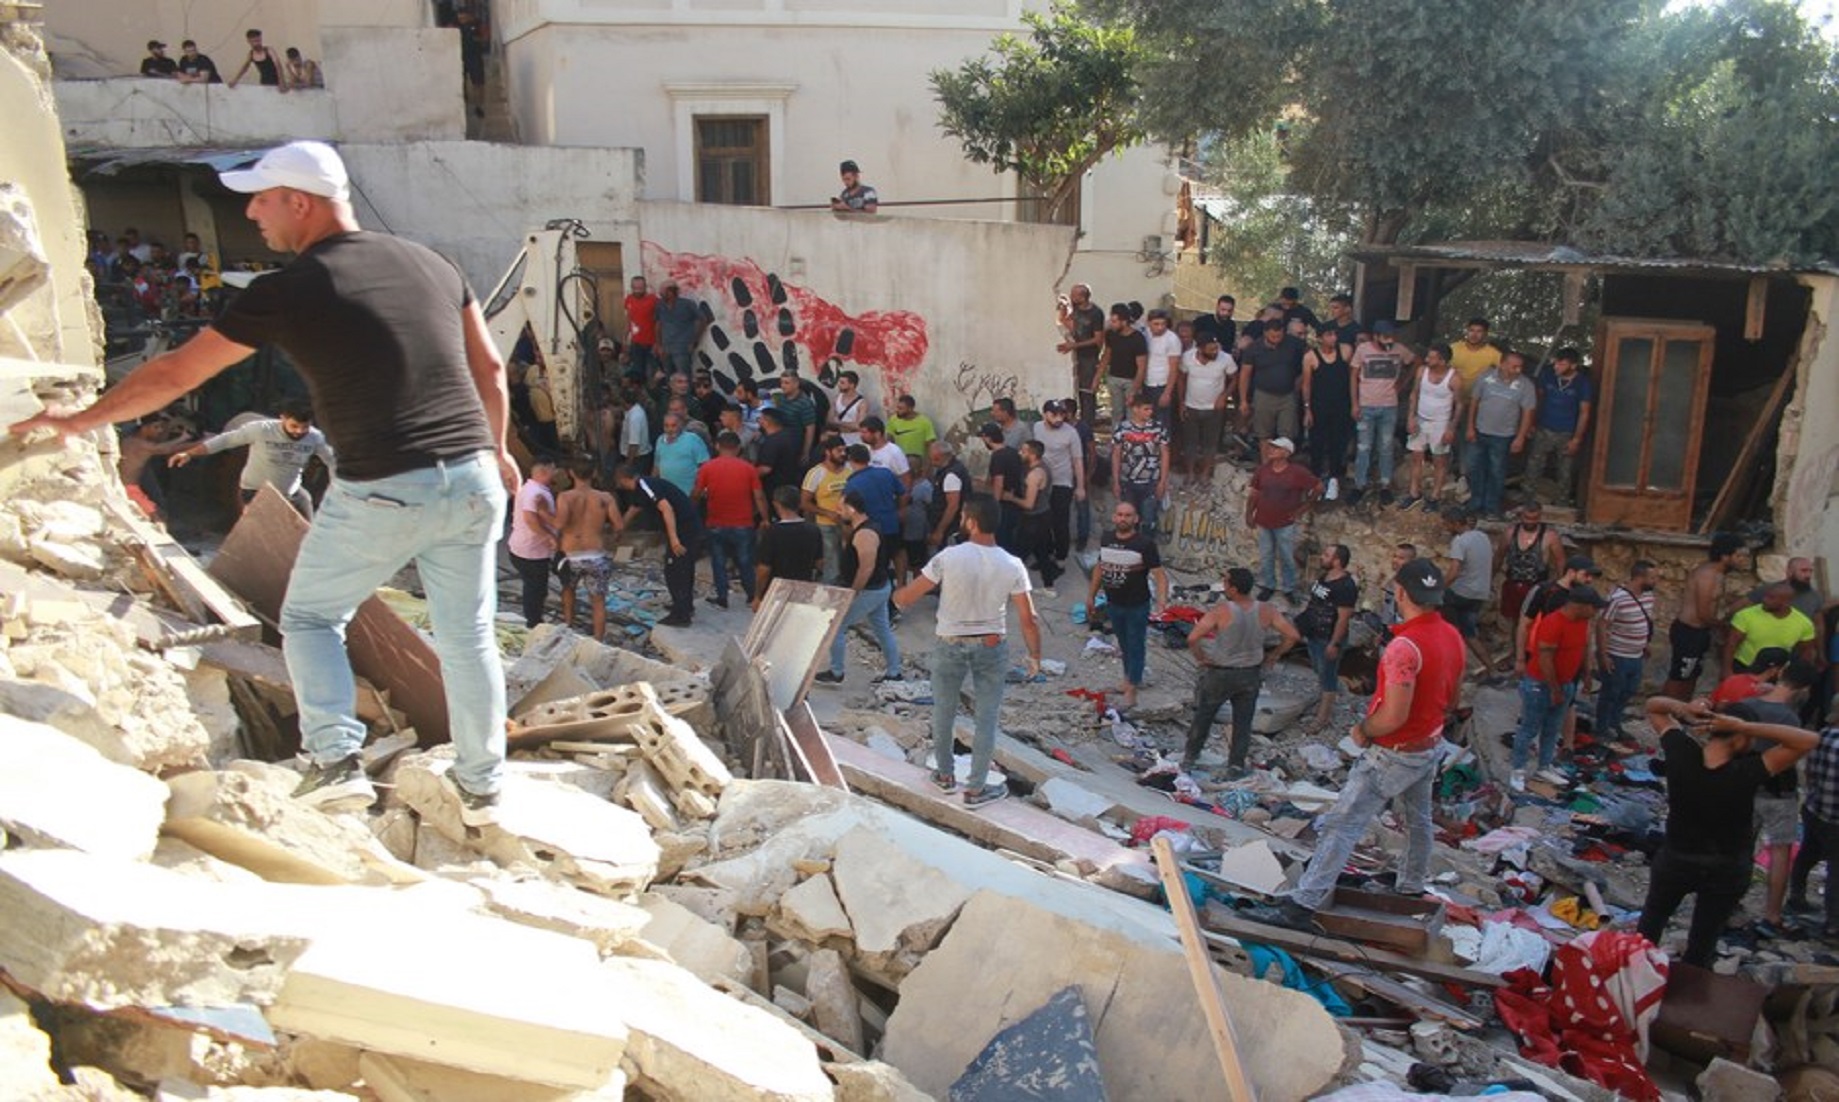 One Dead, Several Injured After Building Collapsed In N. Lebanon